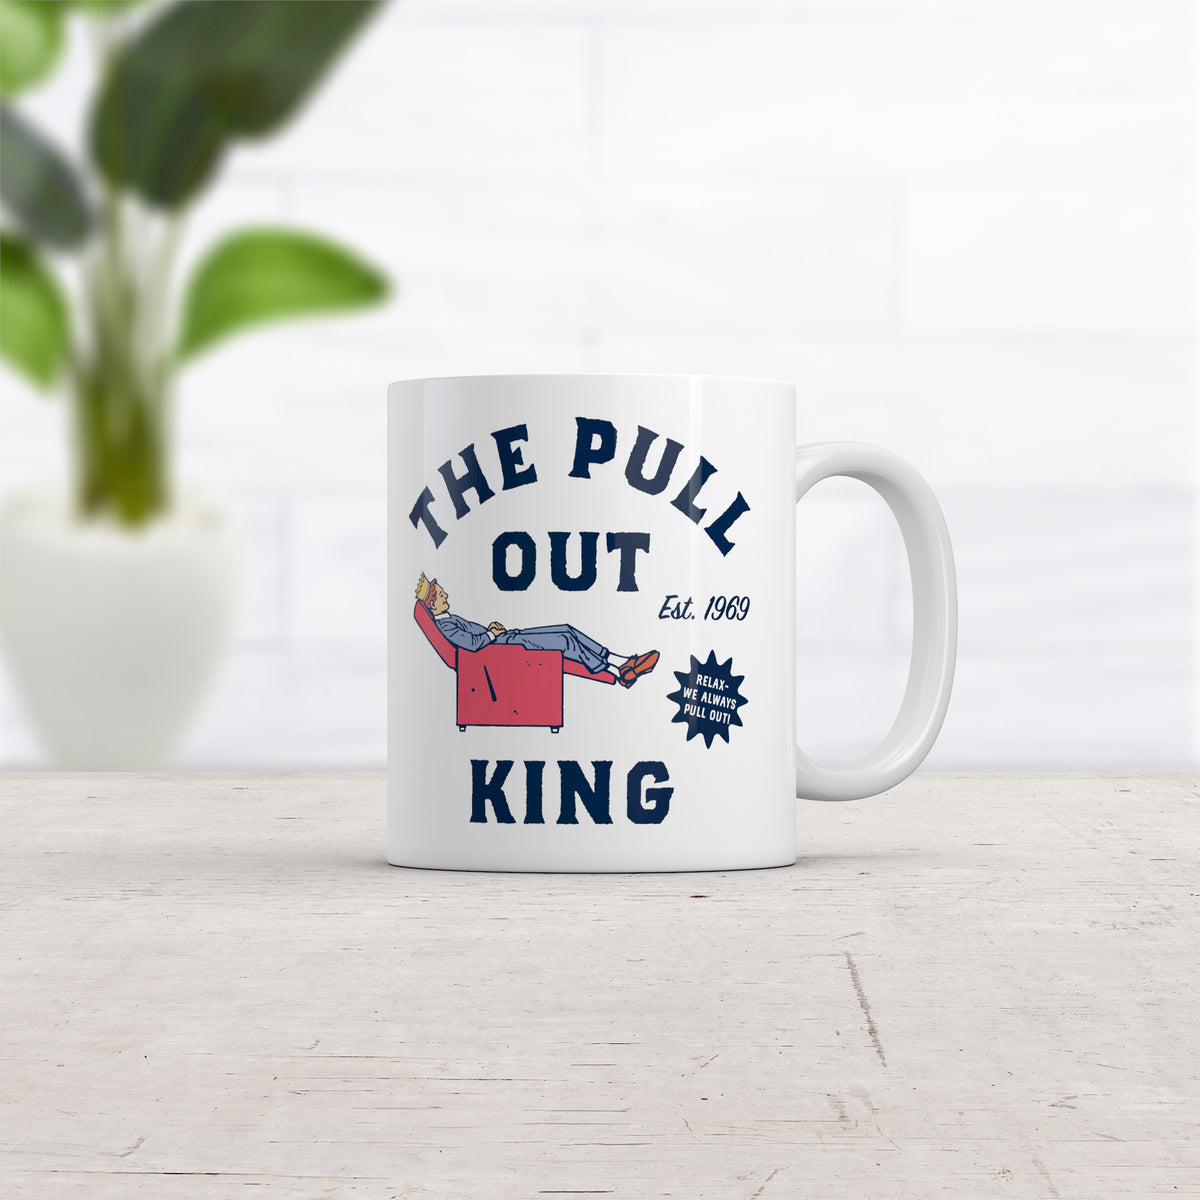 The Pull Out King Mug